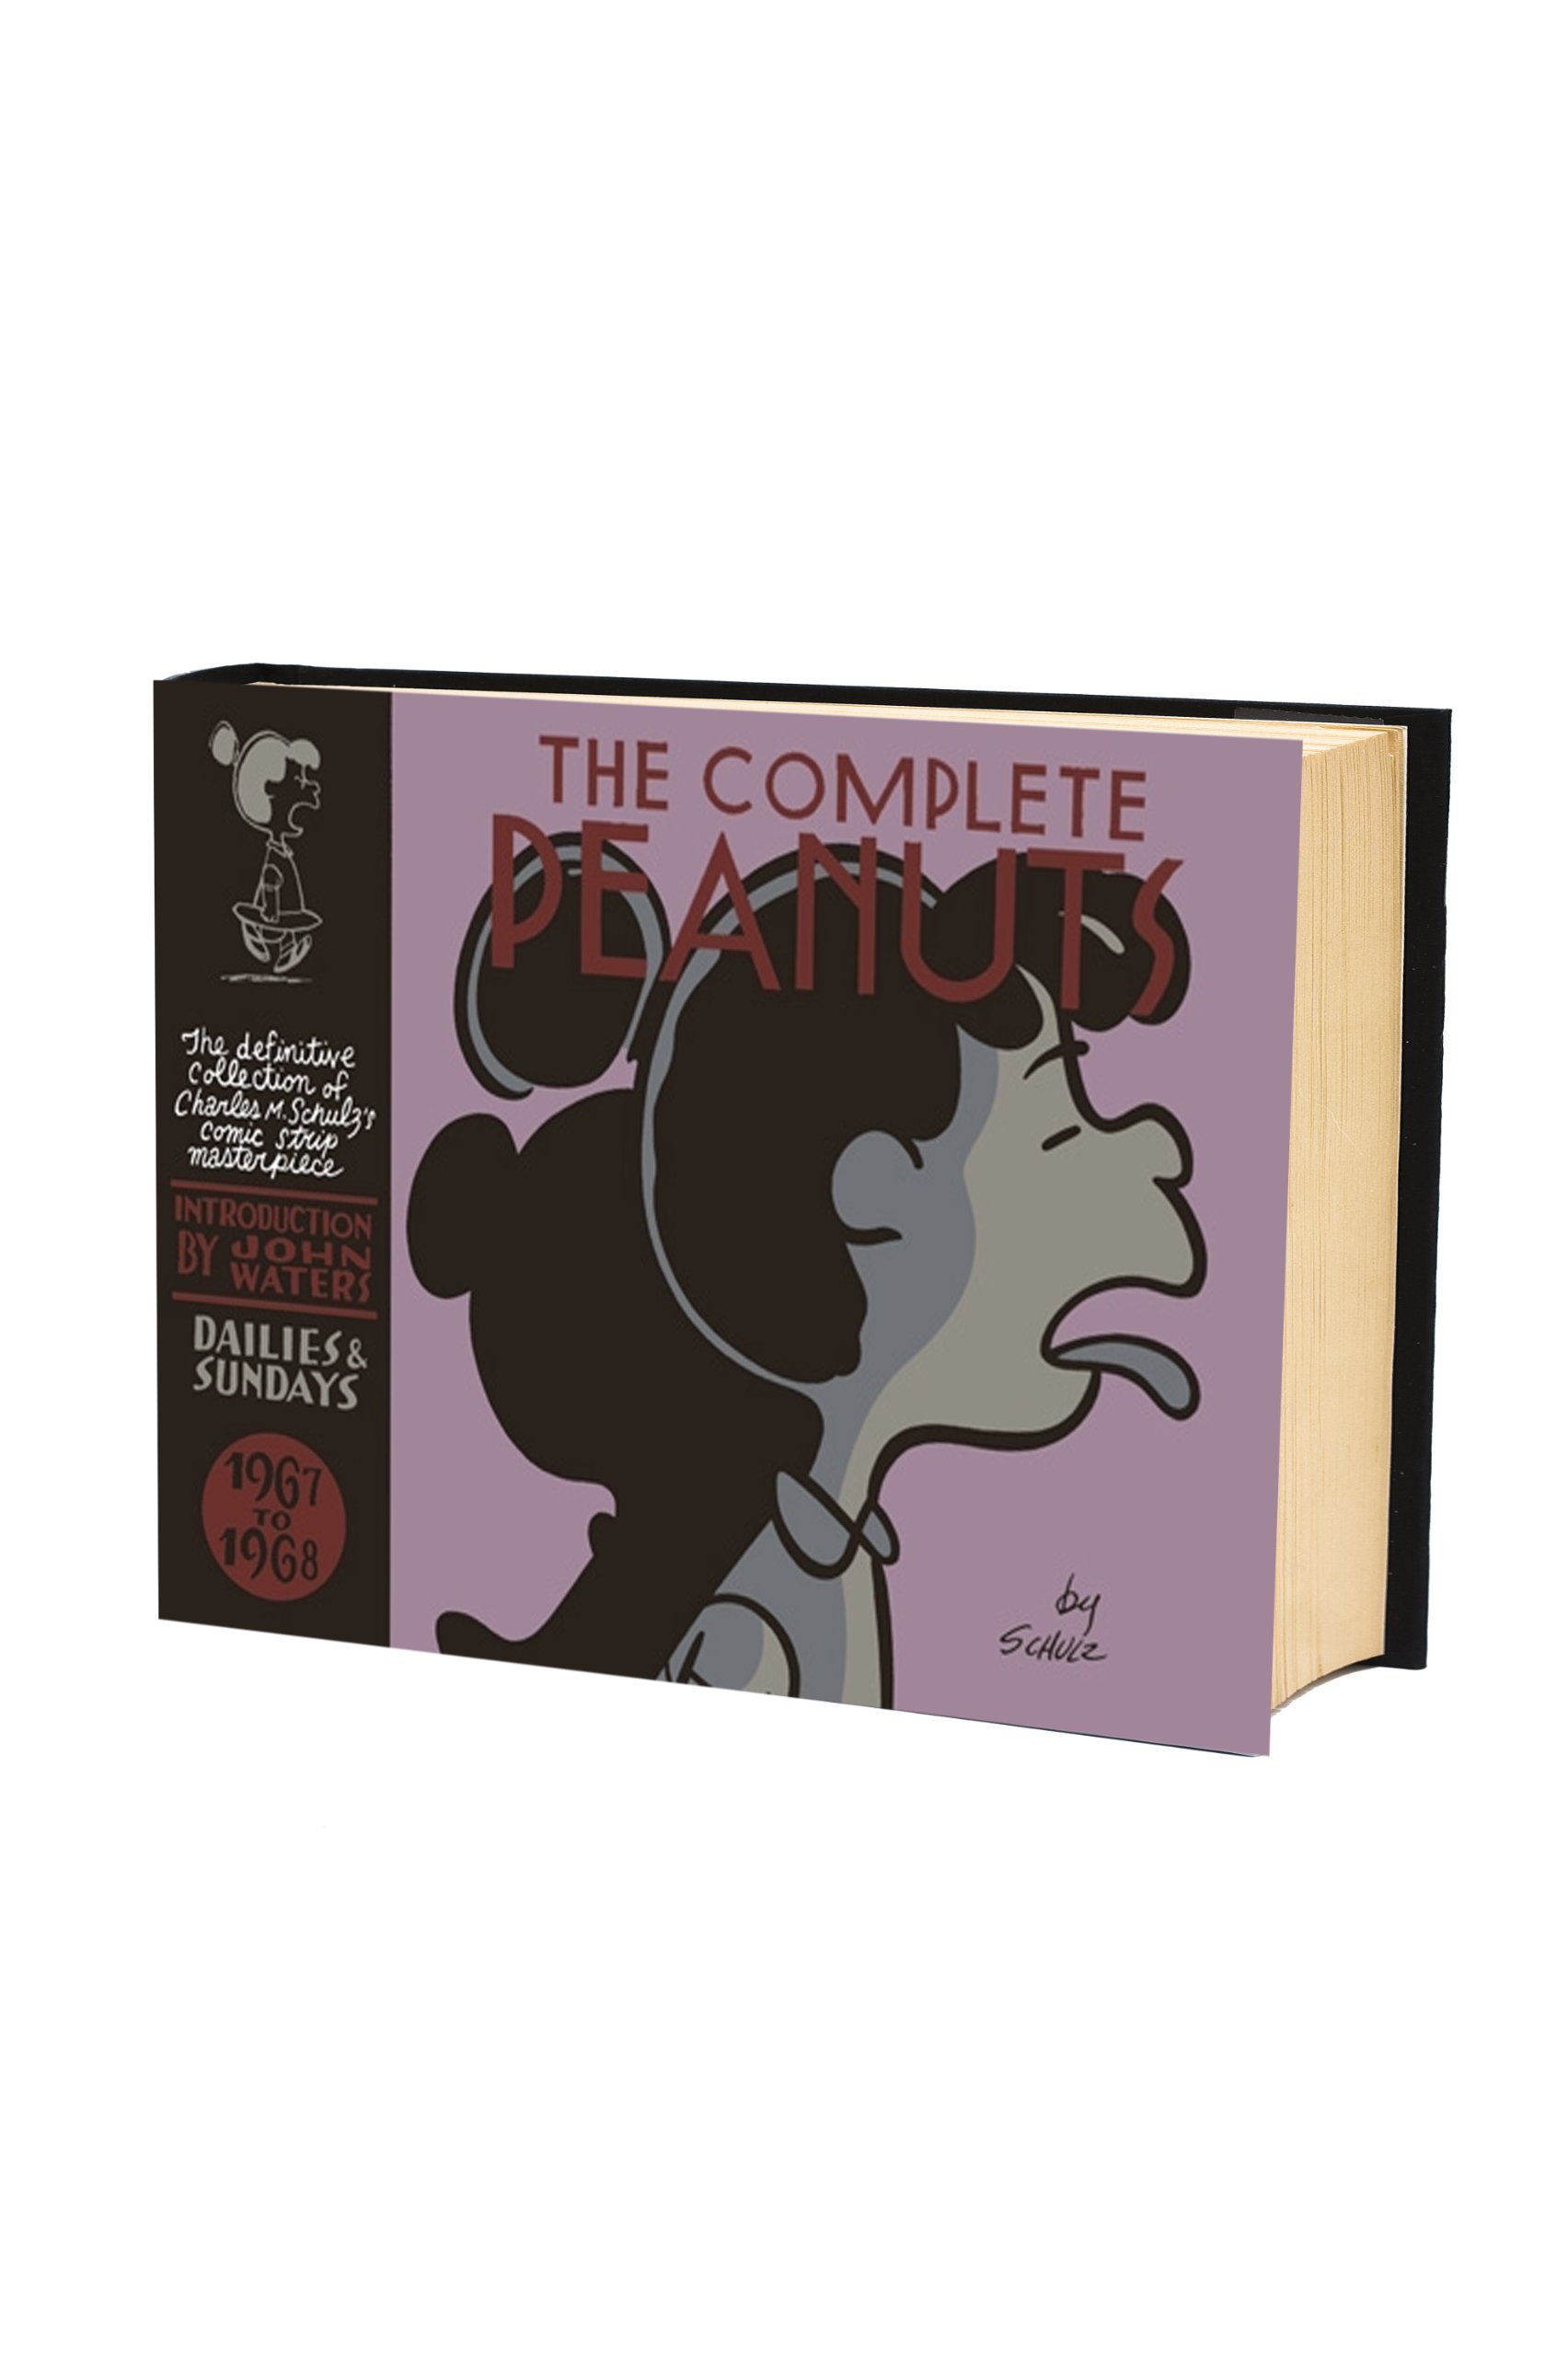 The Complete Peanuts: 1967 to 1968